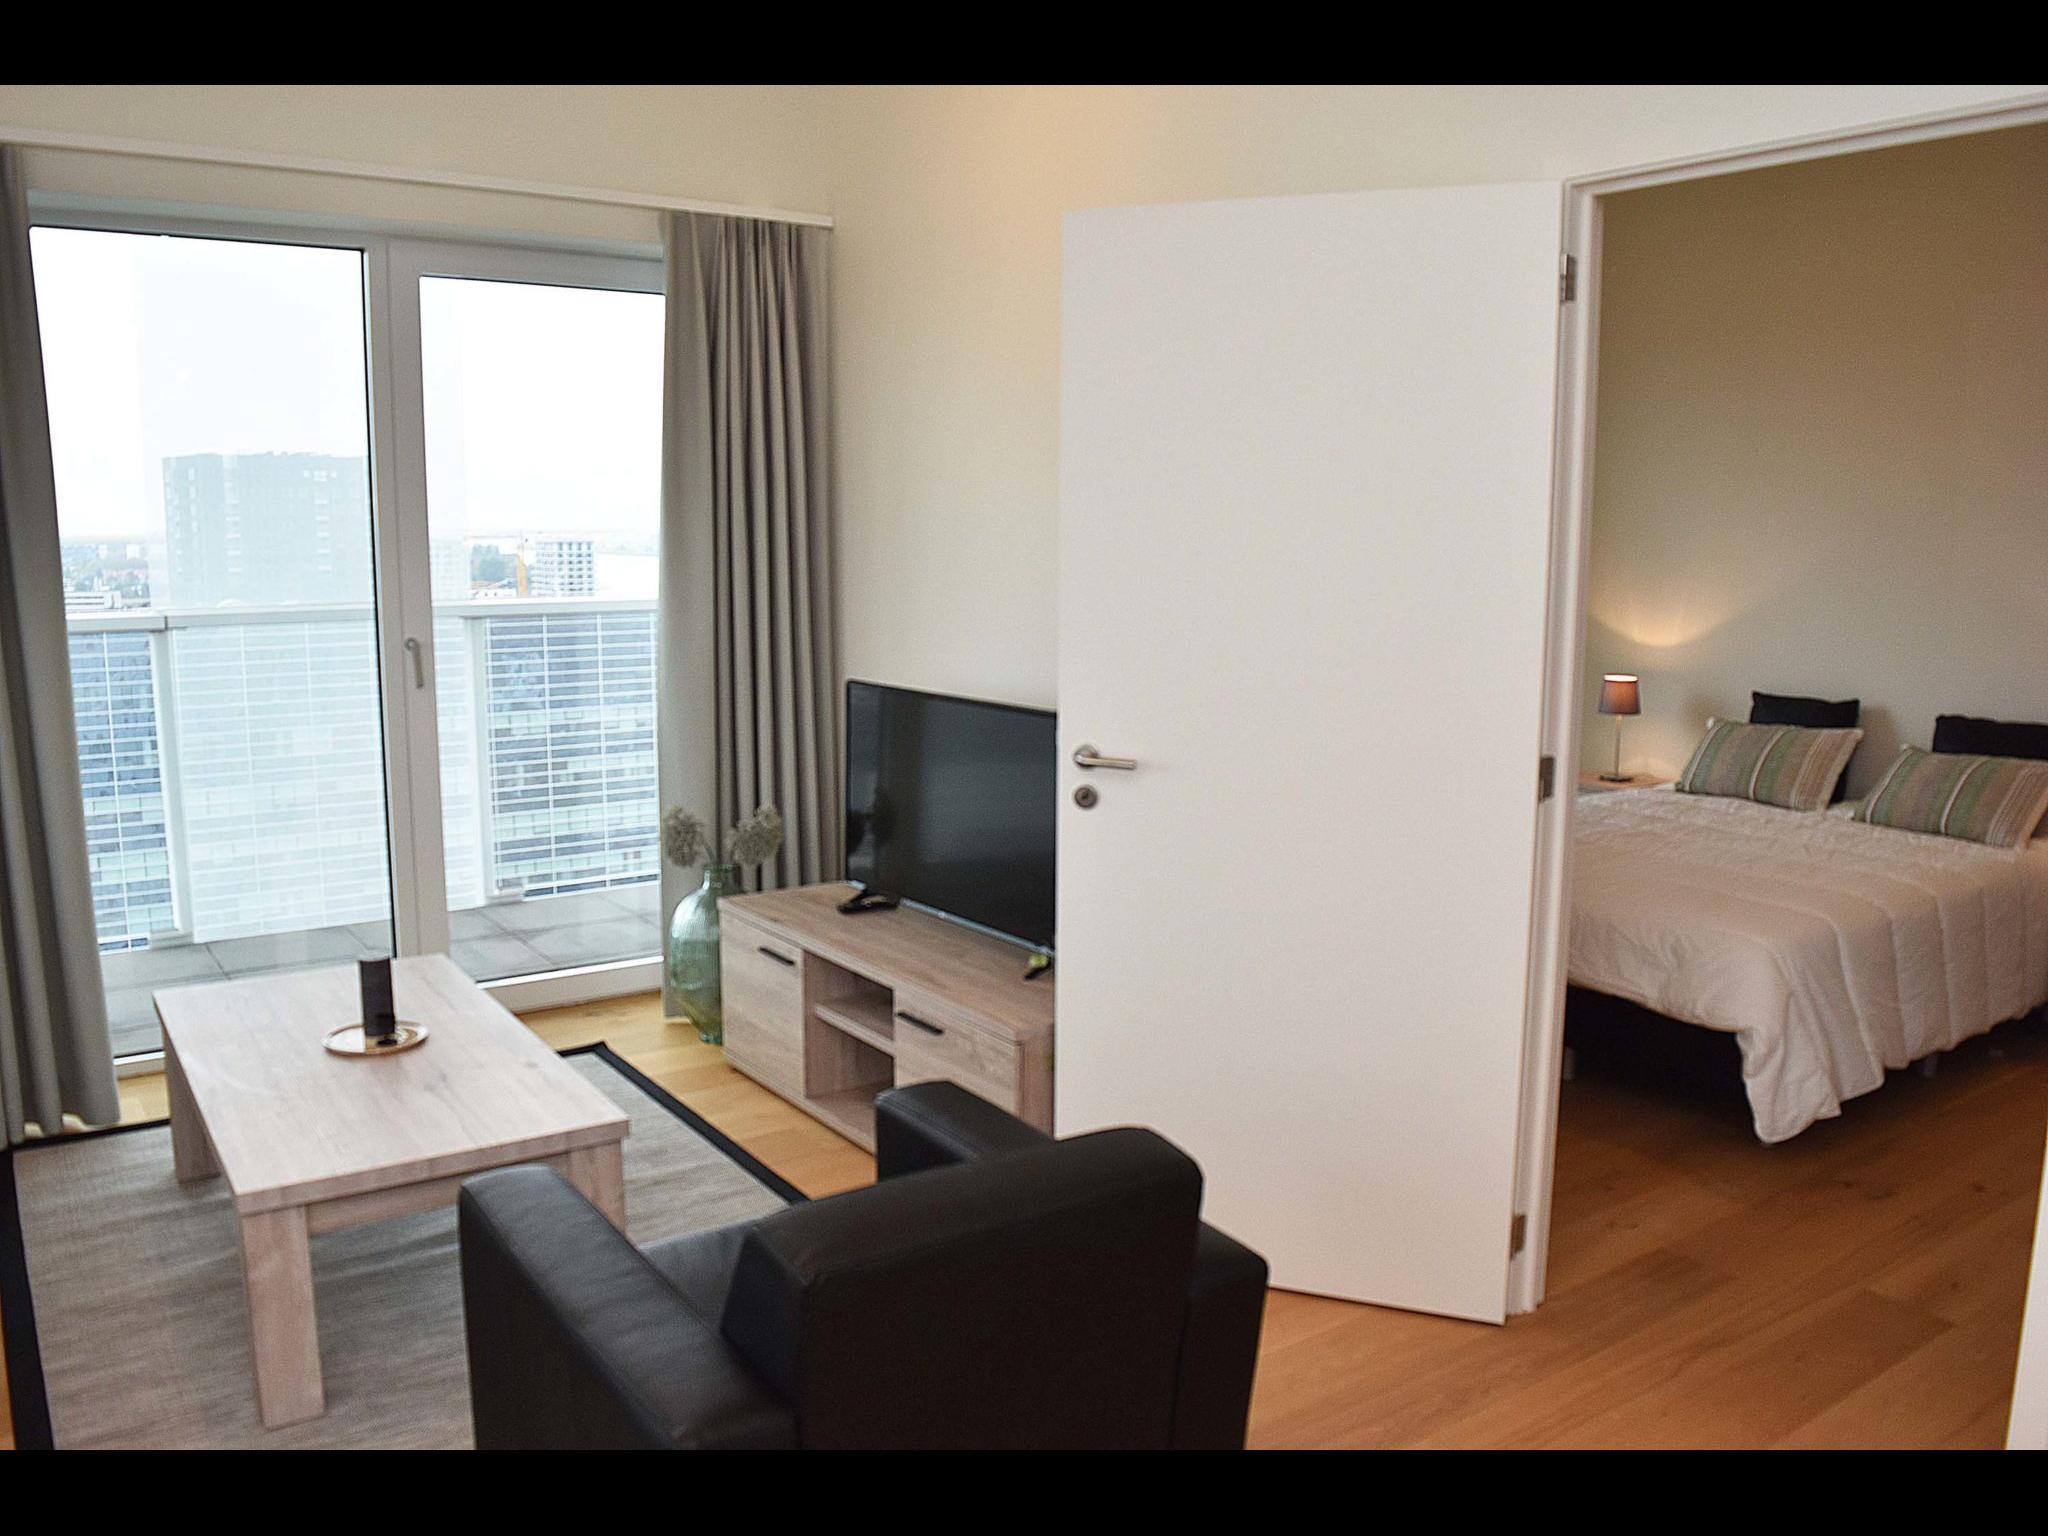 Ellermans - Exclusive apartment in Antwerp for expats